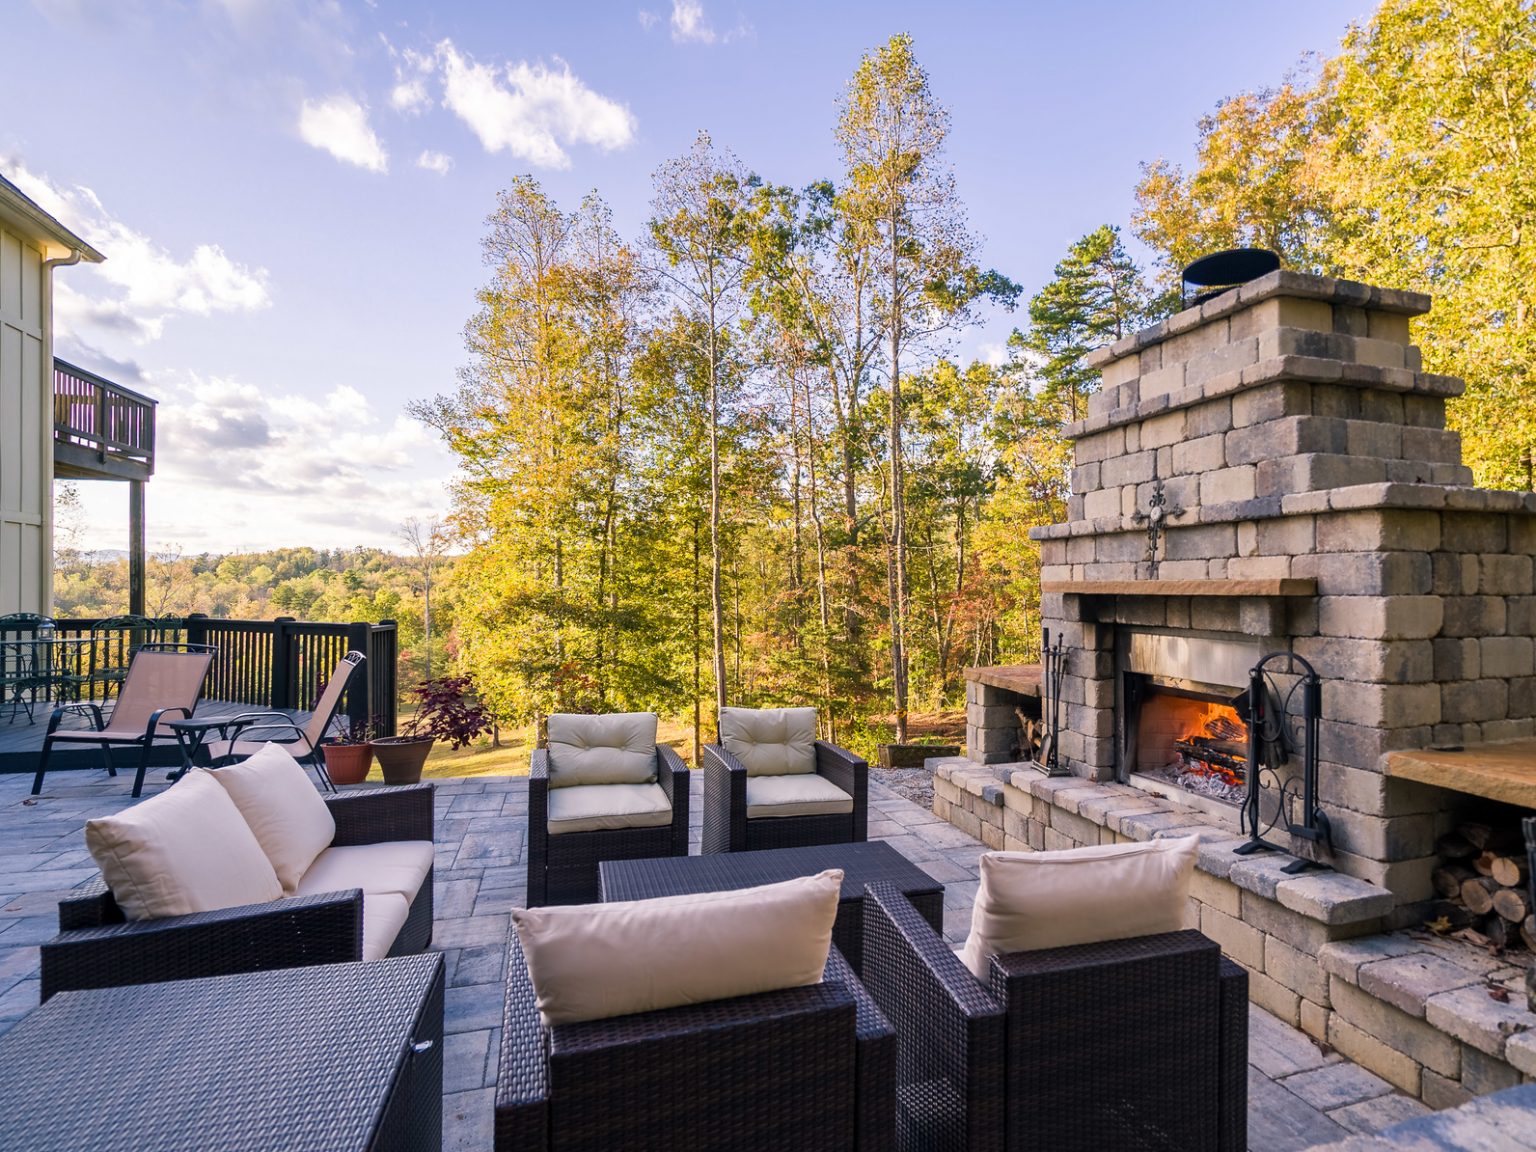 4 Reasons Your Outdoor Living Space Needs A Fireplace This Season